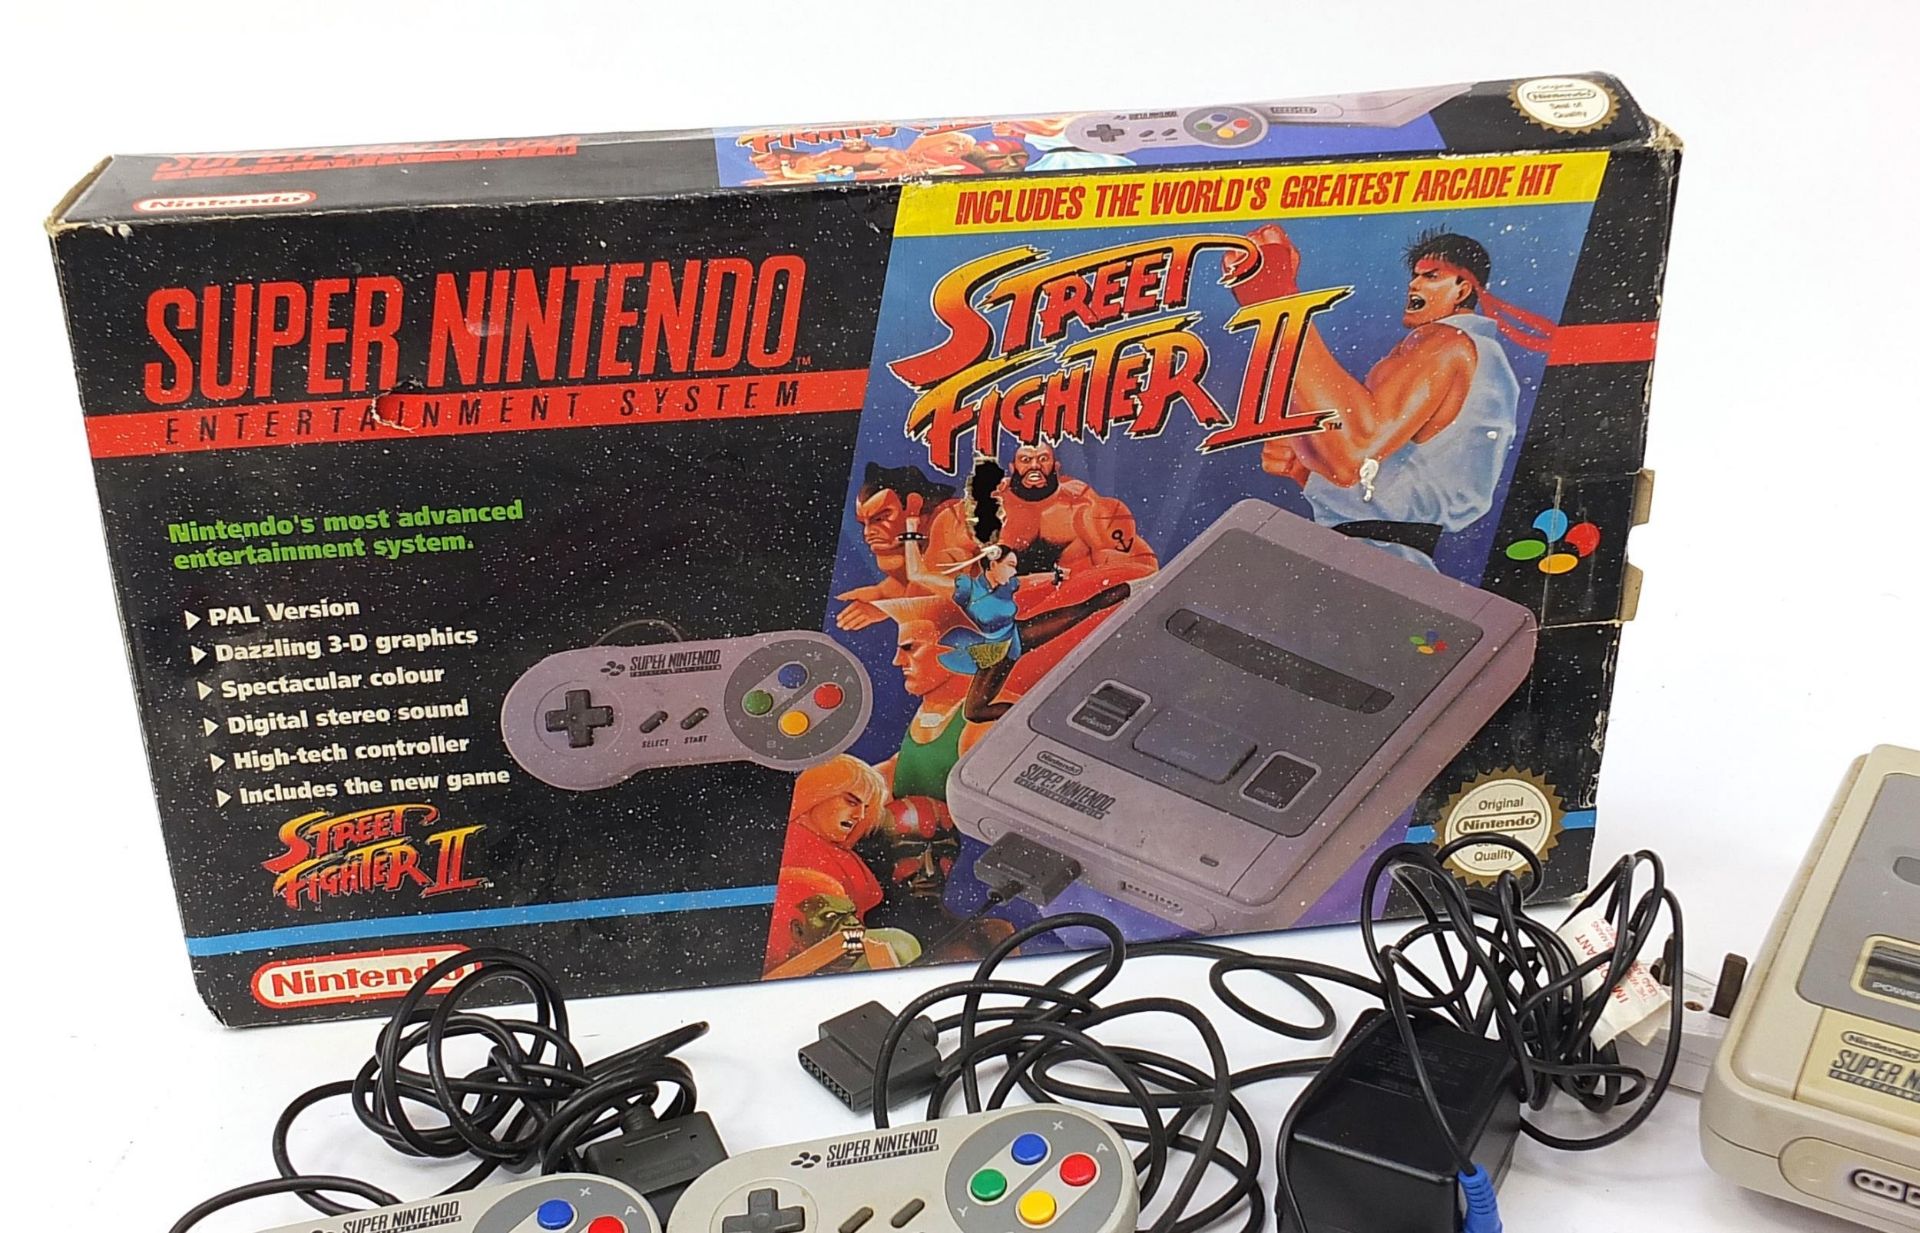 Super Nintendo Street Fighter II games console with box - Image 2 of 4